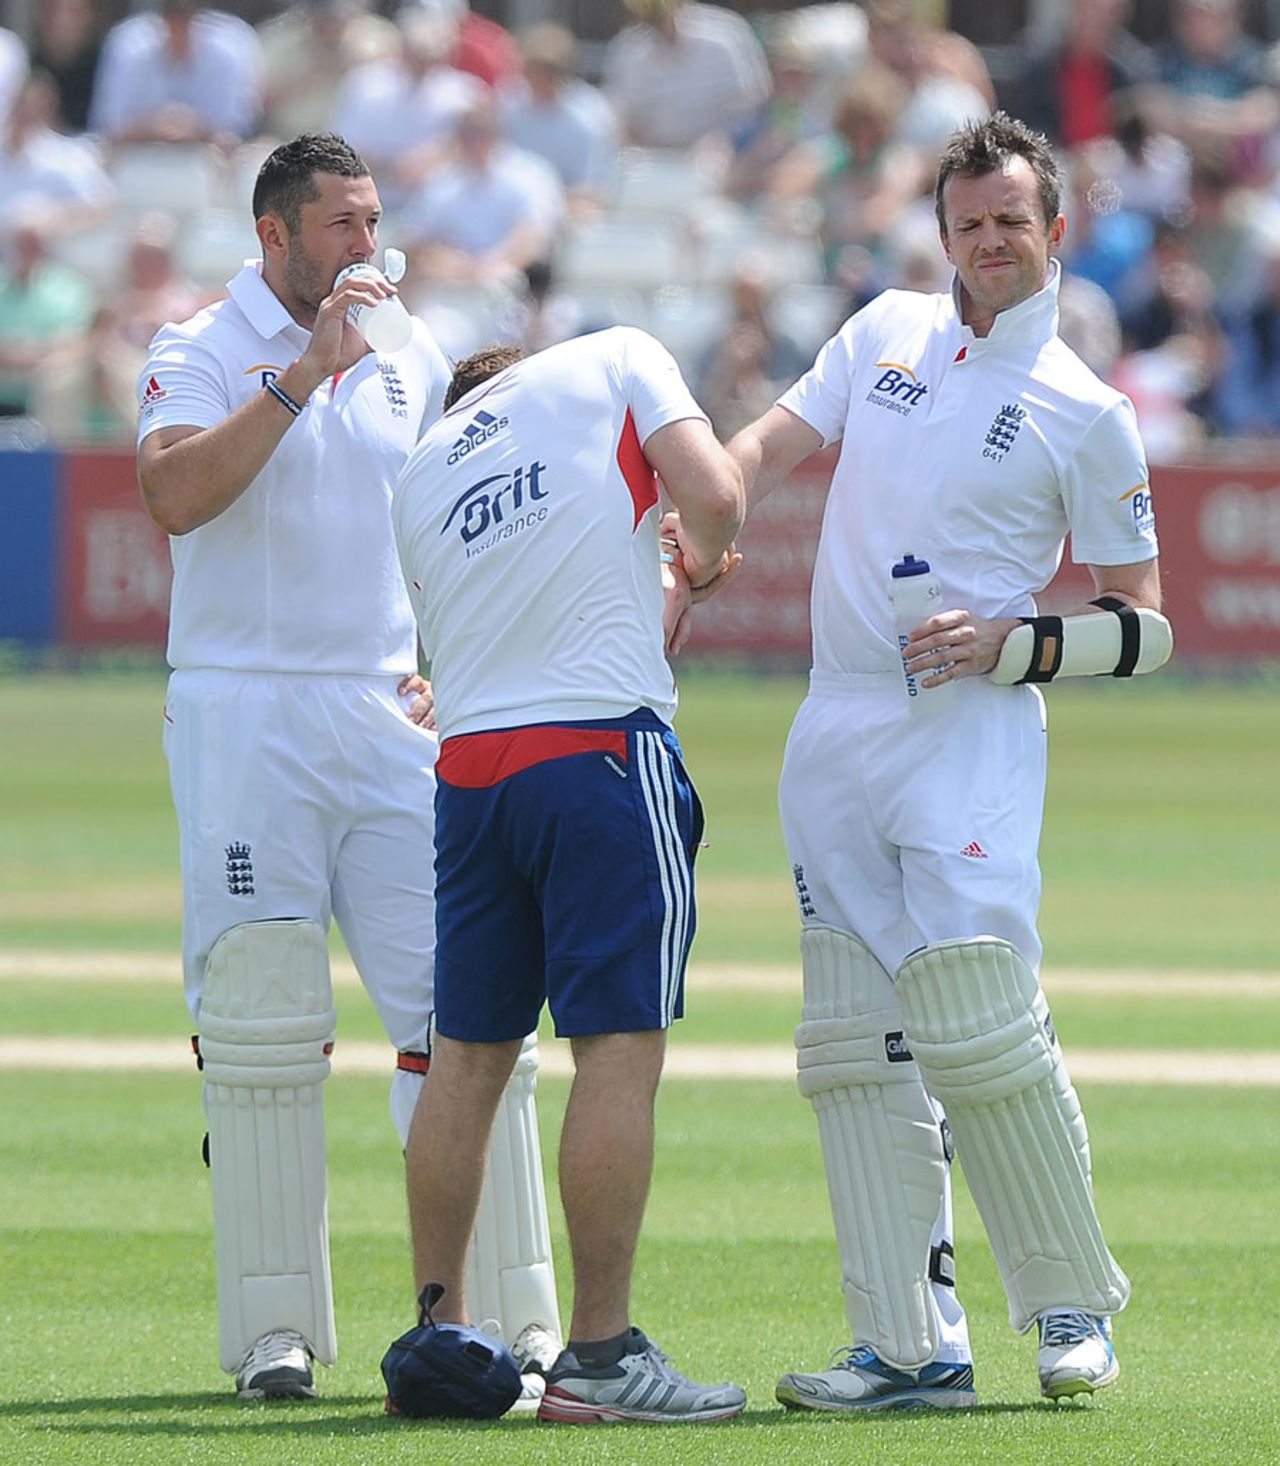 Tim Bresnan looks on as Graeme Swann receives treatment on his right arm, Essex v England, 2nd day, Chelmsford, July 1, 2013